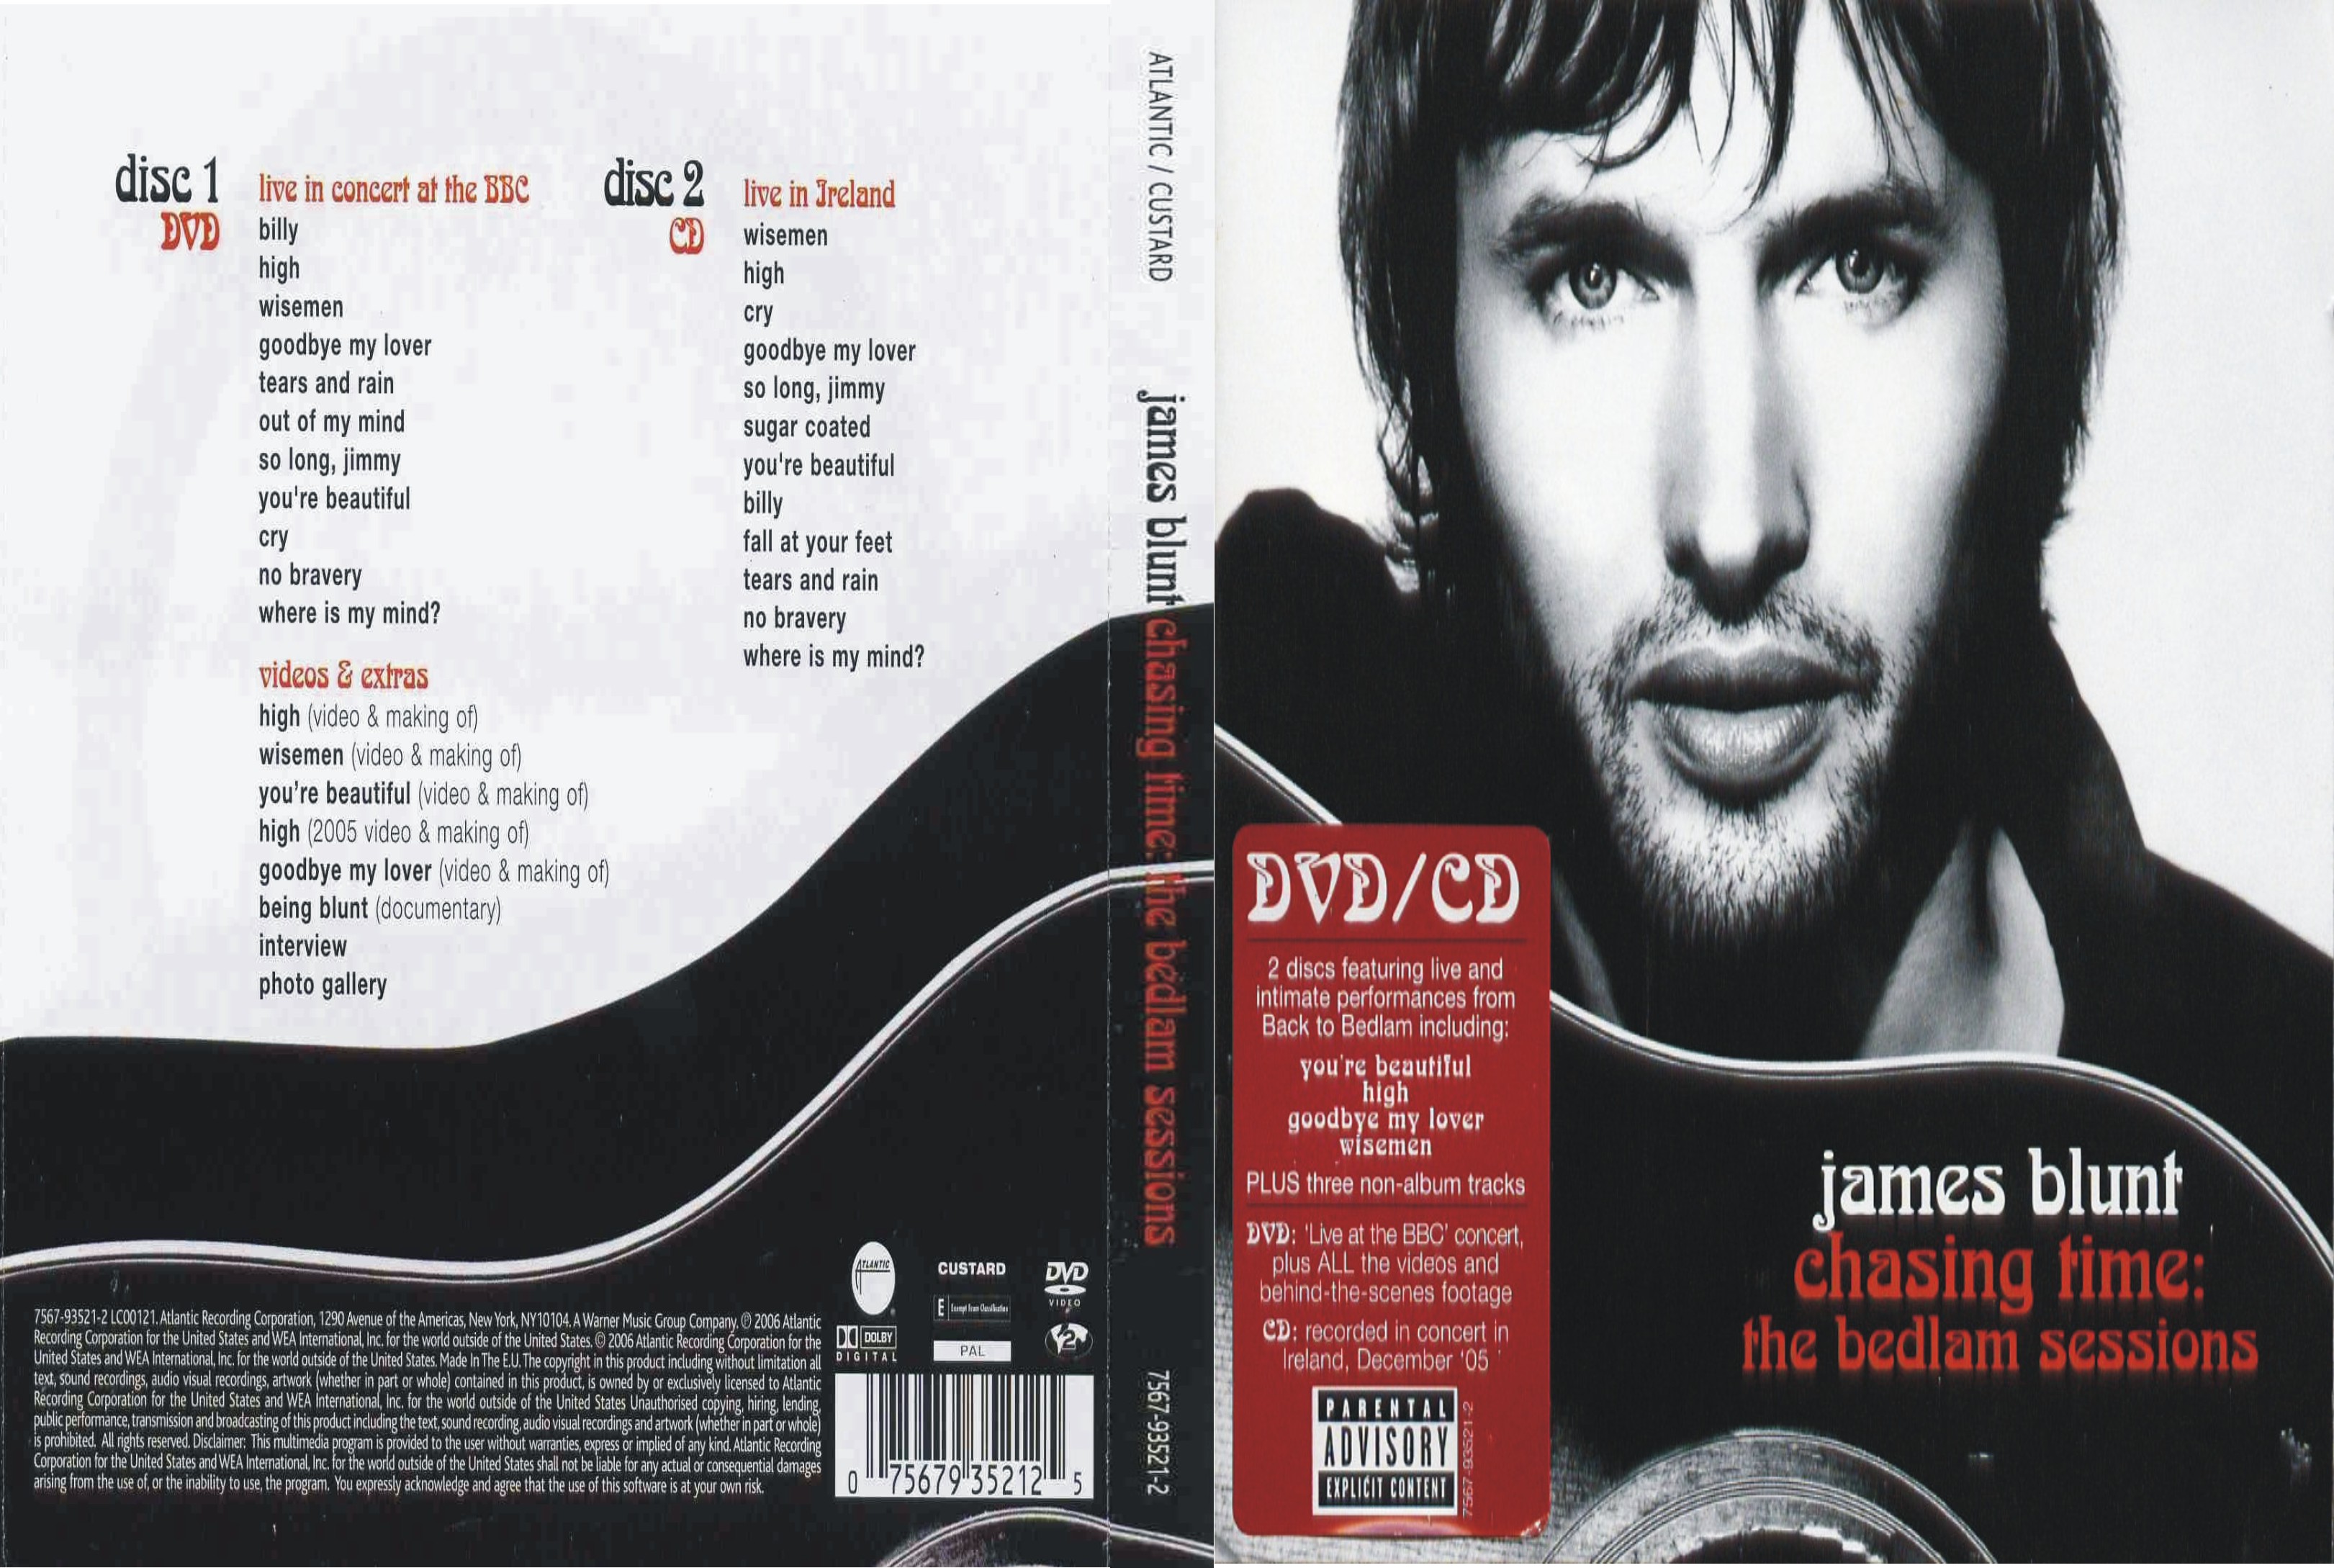 Jaquette DVD James Blunt - Chassing Time The Bedlam Sessions por longboard